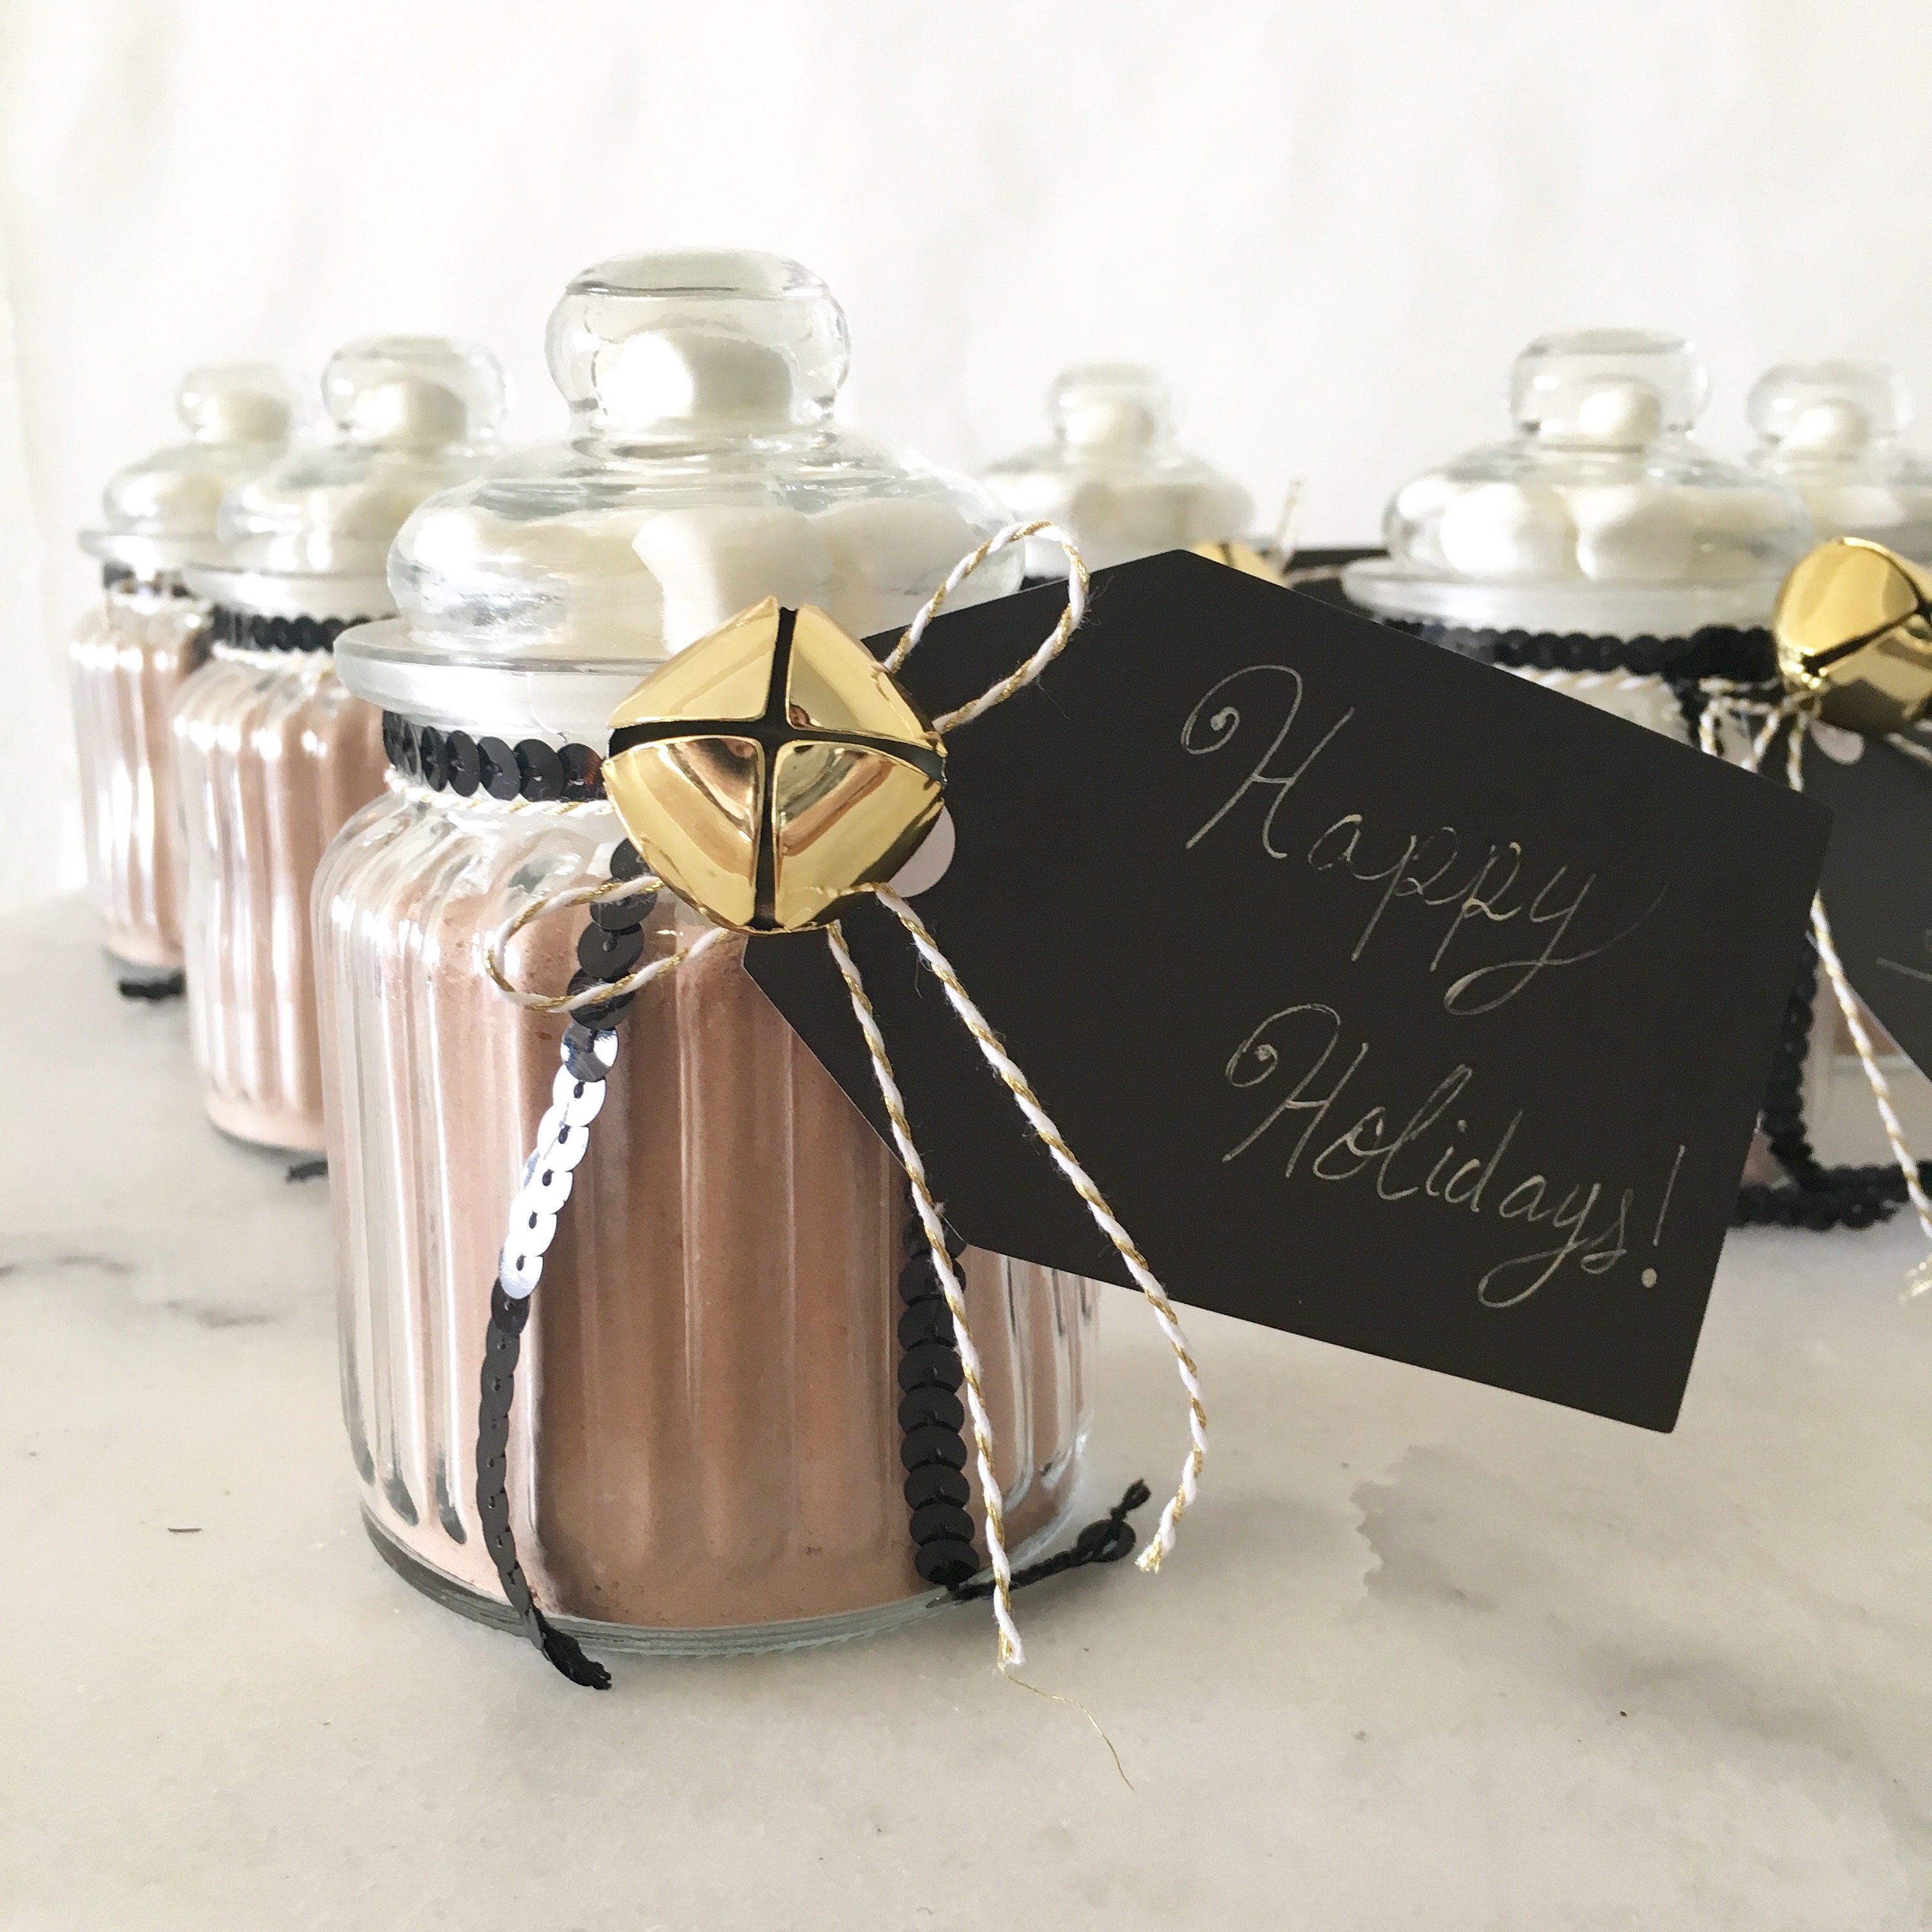 Homemade Hot Cocoa Mix in a Jar